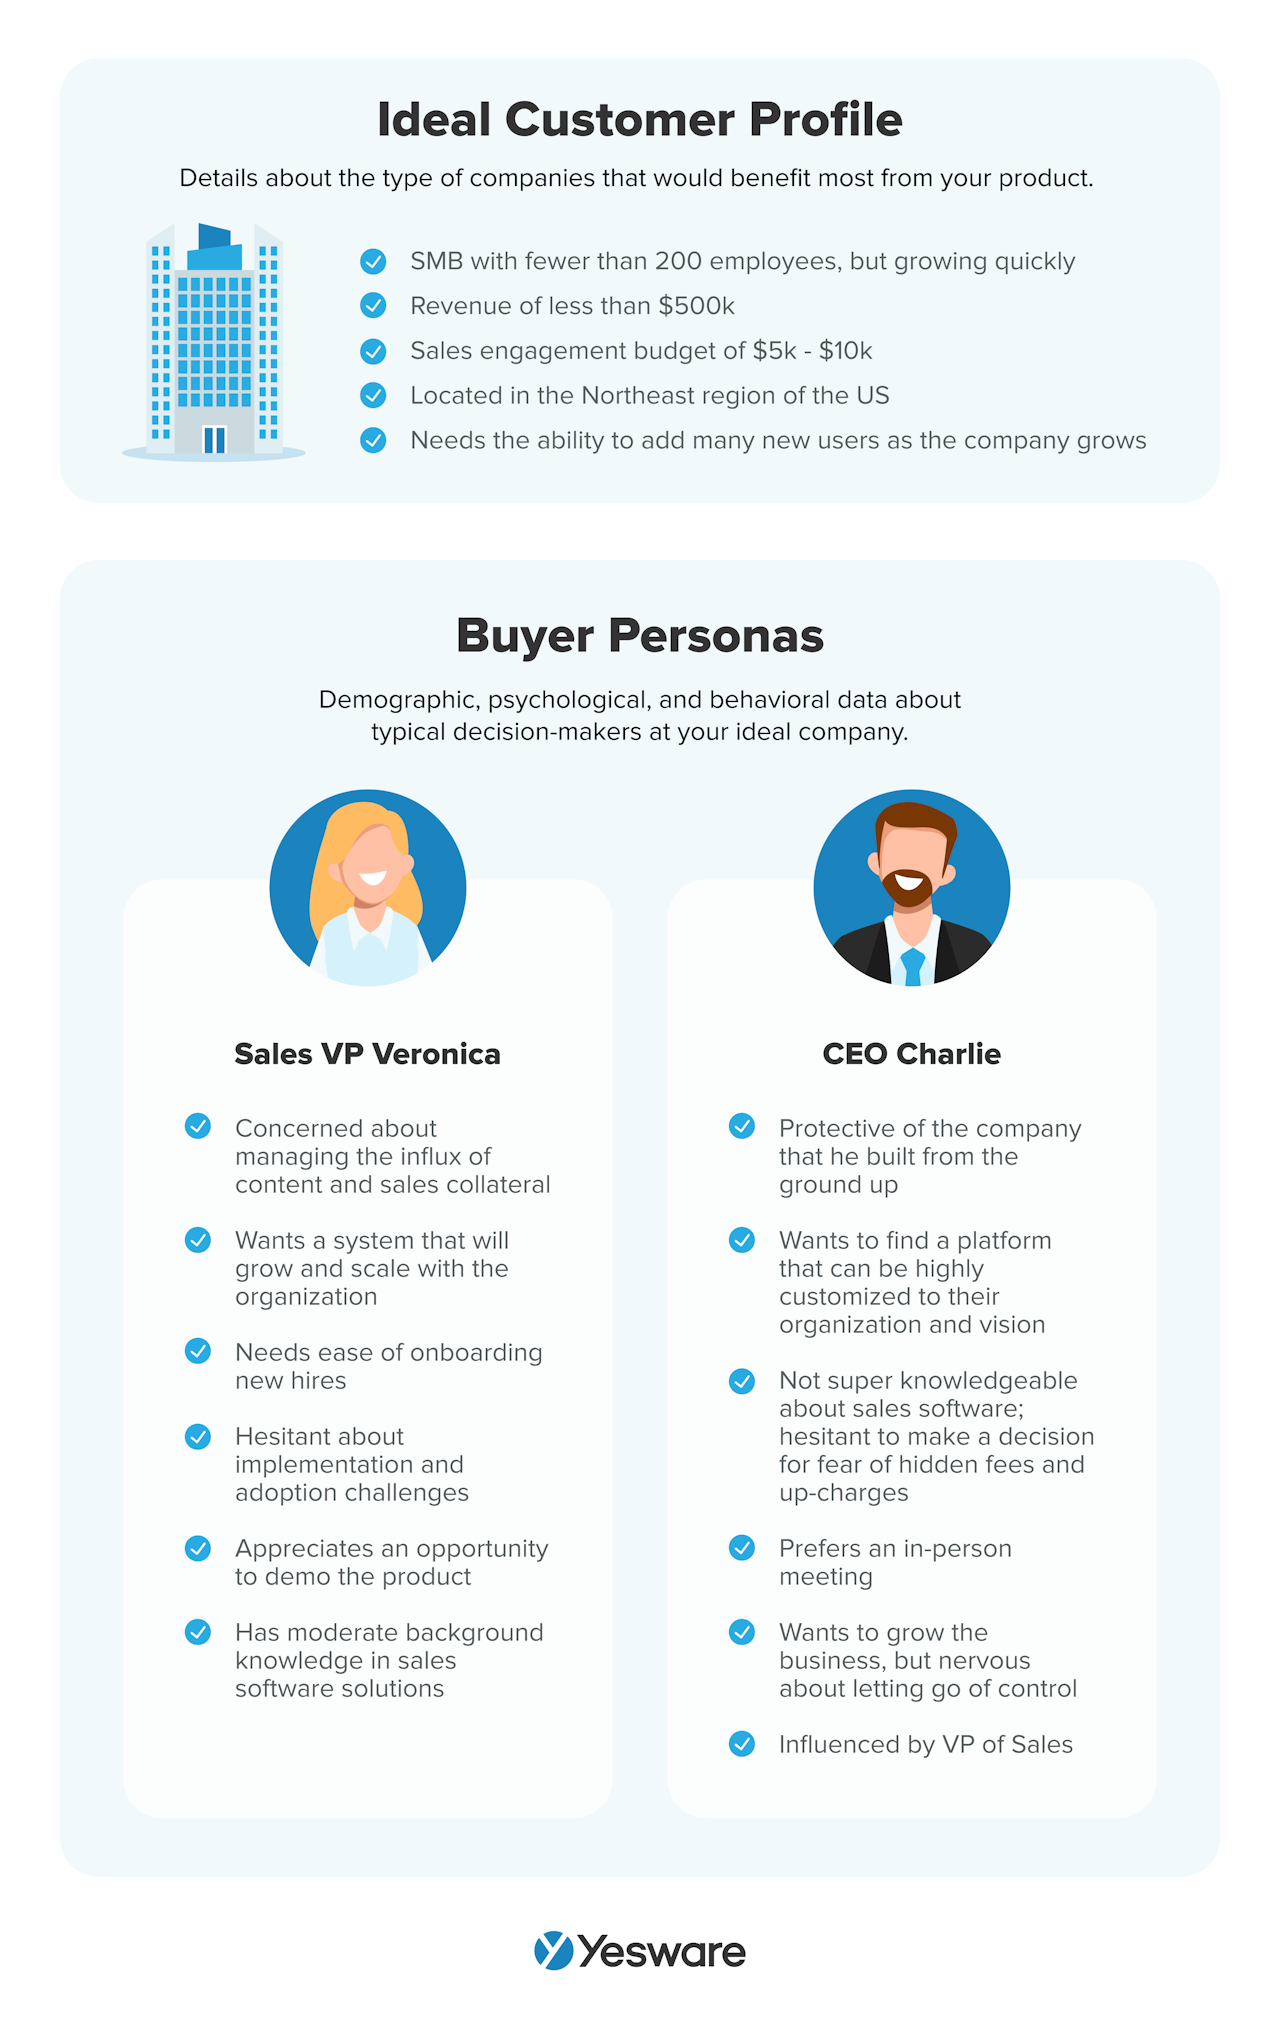 b2b sales funnel: ideal customer profile and buyer personas